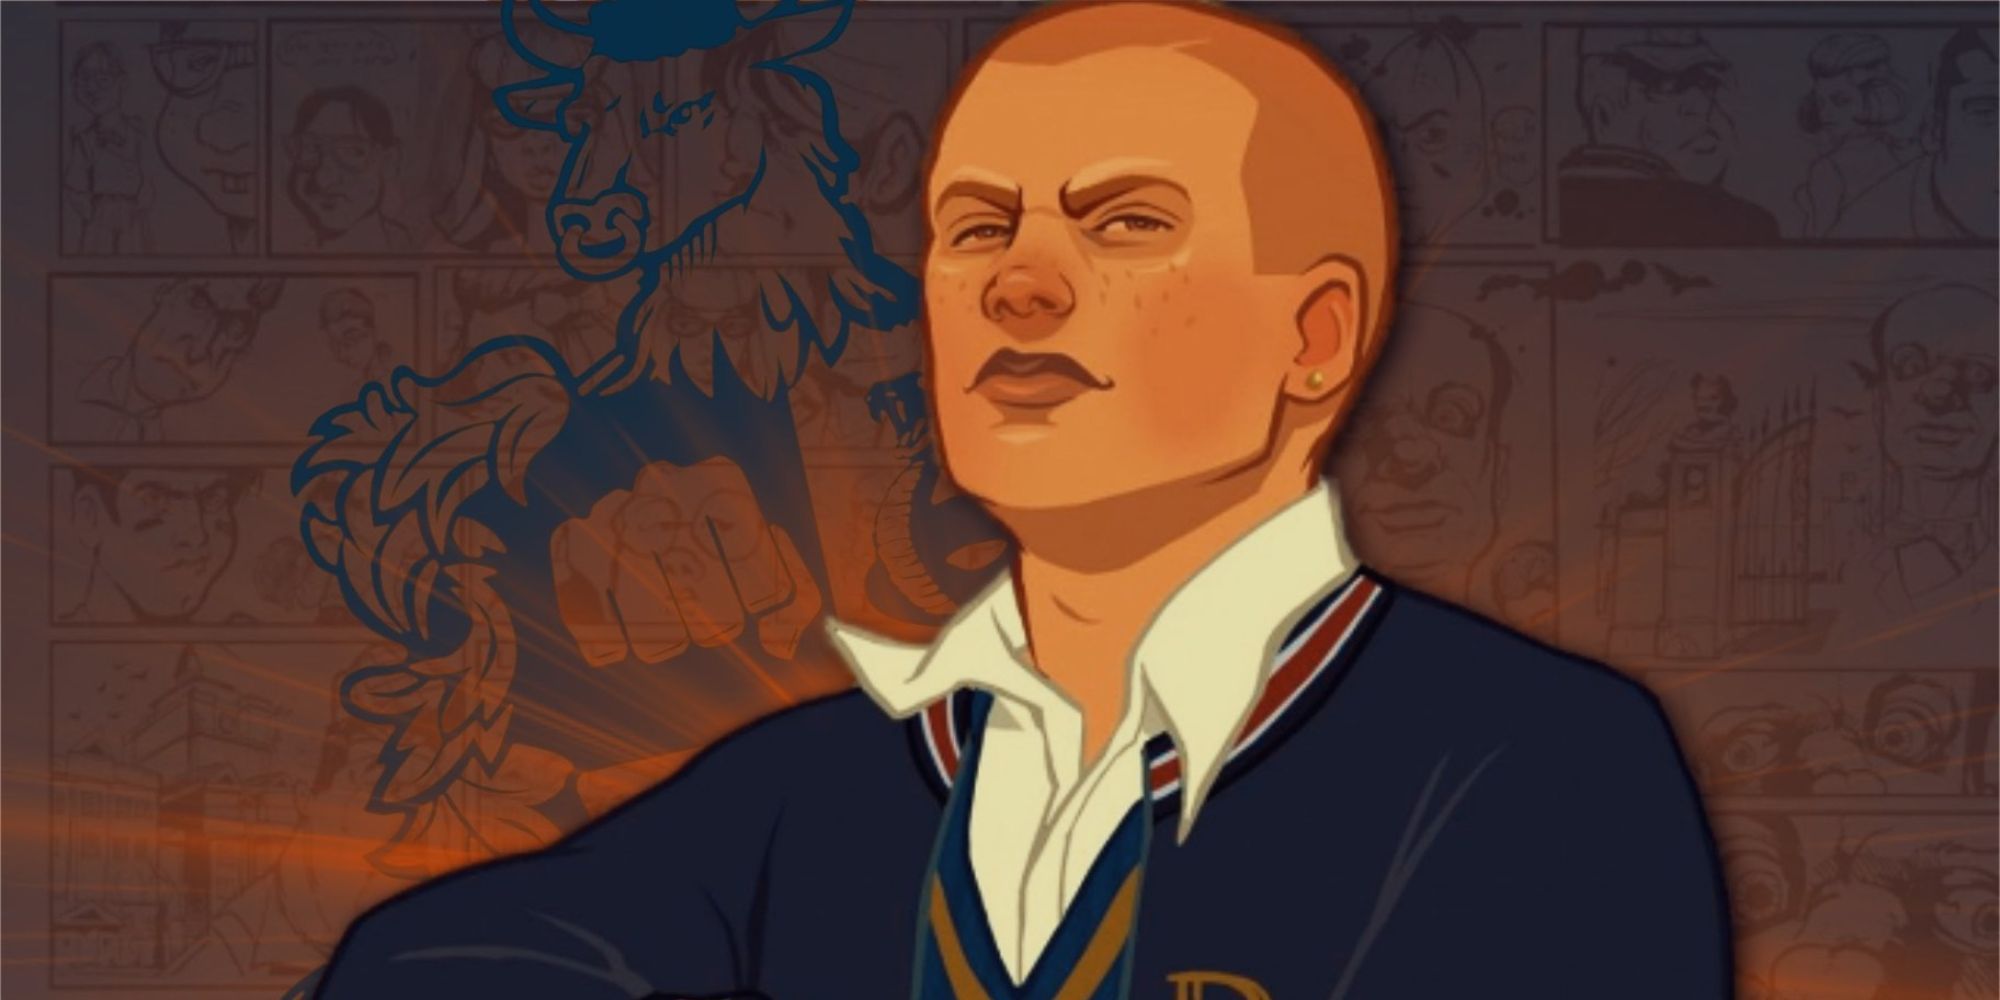 Protagonist Jimmy Hopkins with the Bullworth Academy Logo in the Background